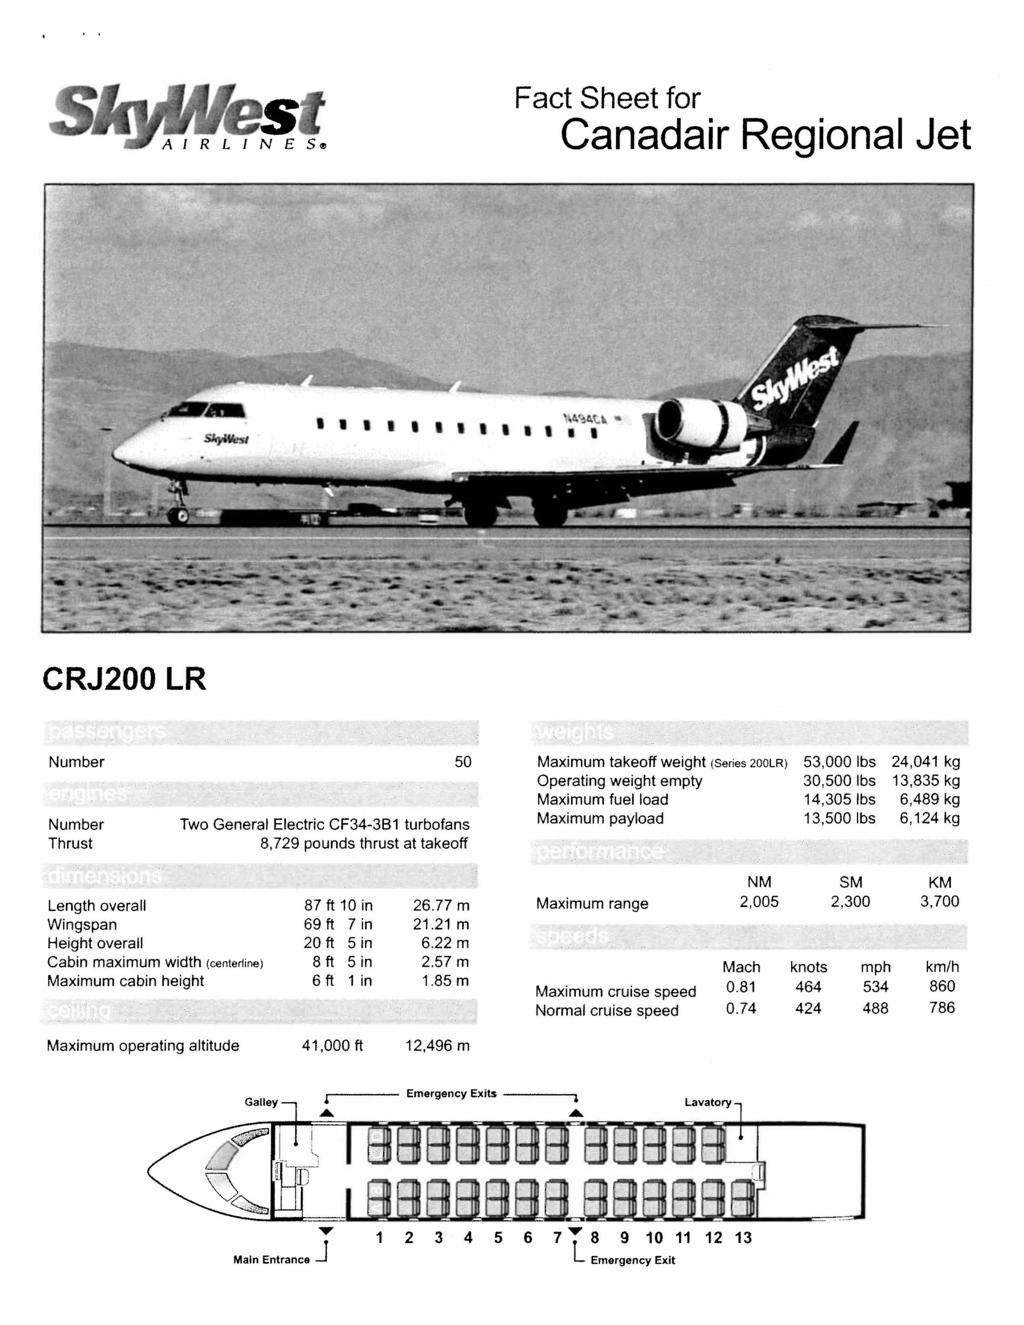 Fact Sheet for Canadair Regional Jet CRJ200 LR Number Number Thrust 50 Two General Electric CF34-3B1 turbofans 8,729 pounds thrust at takeoff Maximum takeoff weight (Series 200LR) Operating